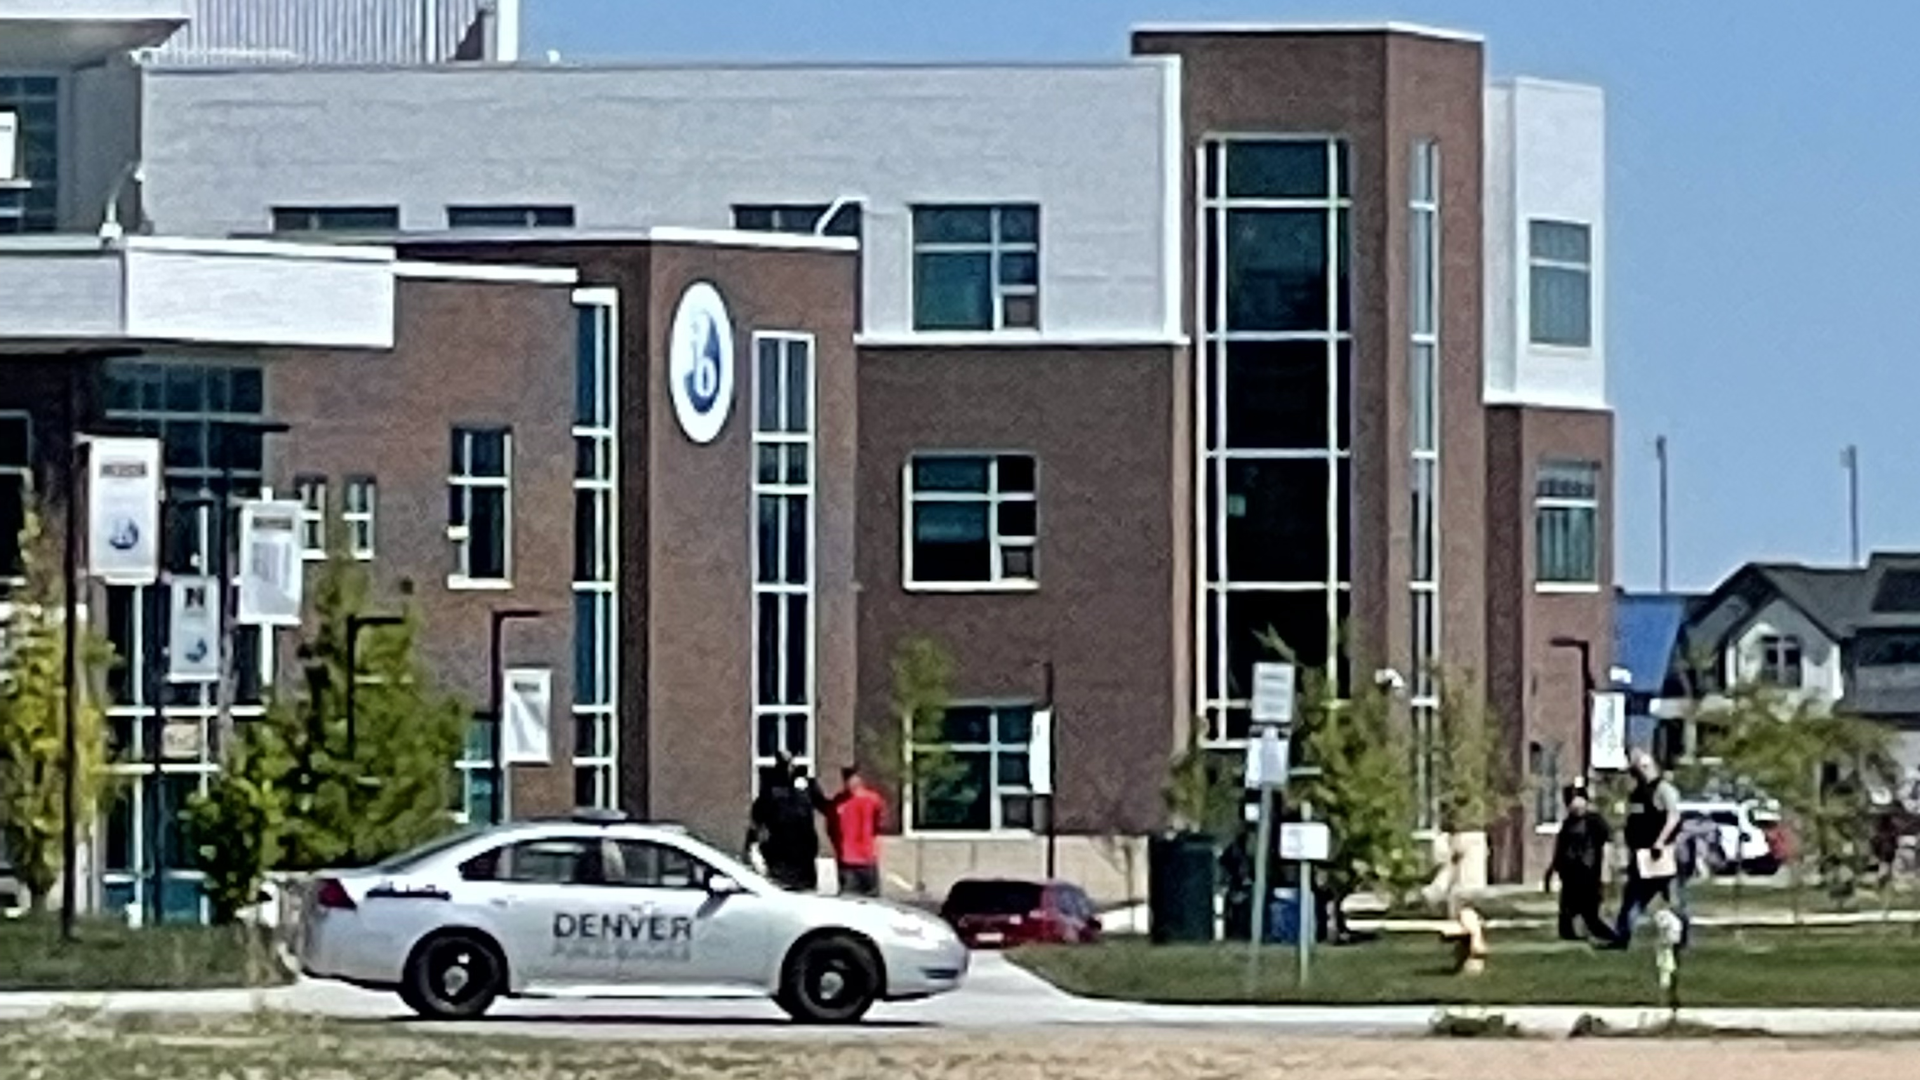 Authorities take a person into custody outside Northfield High School in Denver on May 26, 2022. Photo: Esteban L. Hernandez